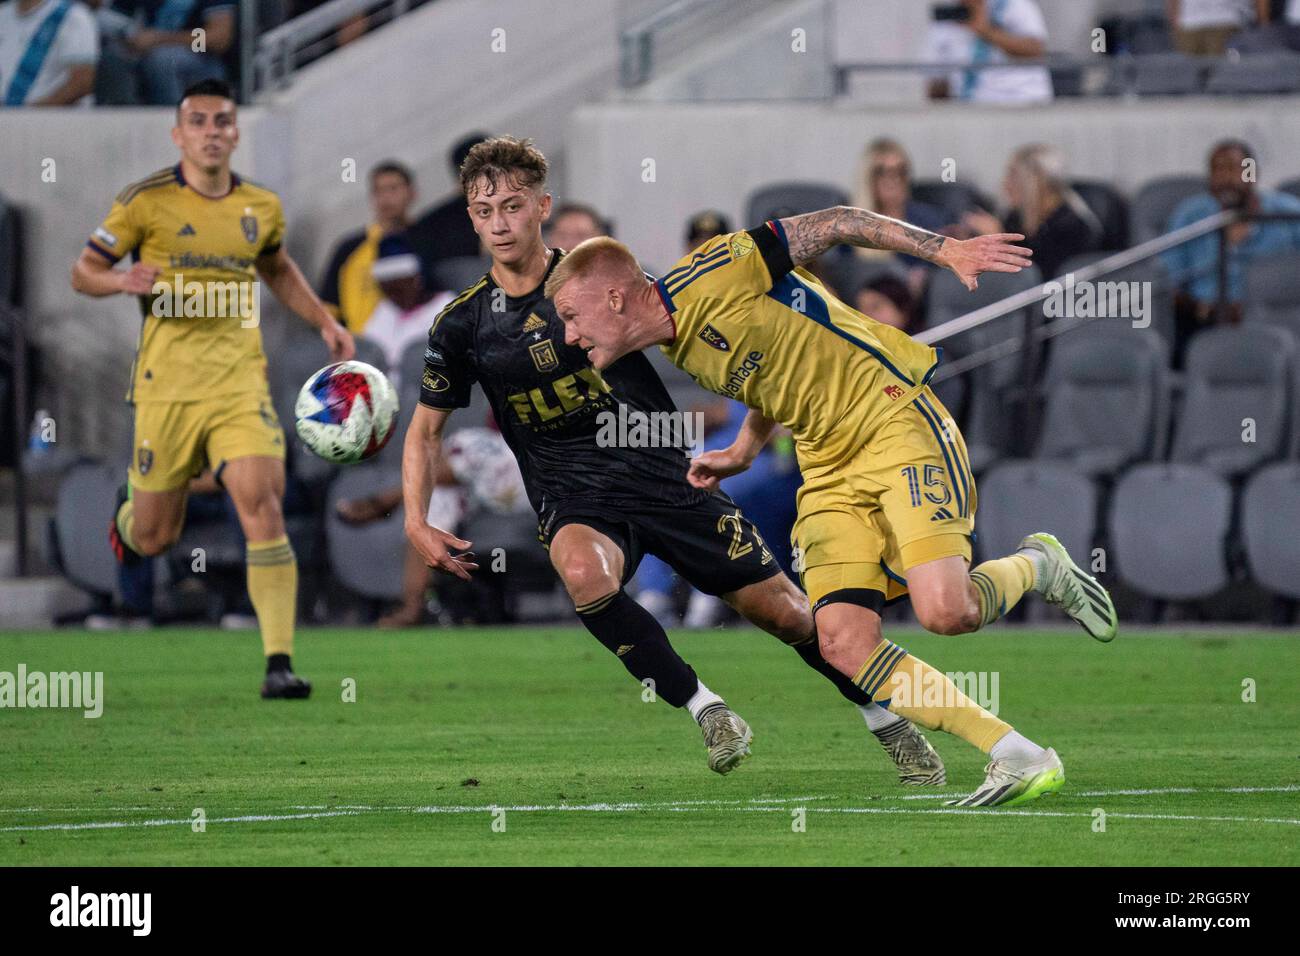 Real Salt Lake defender Justen Glad (15) heads the ball against LAFC forward Nathan Ordaz (27) during a Leagues Cup 2023 match, Tuesday, August 8, 202 Stock Photo